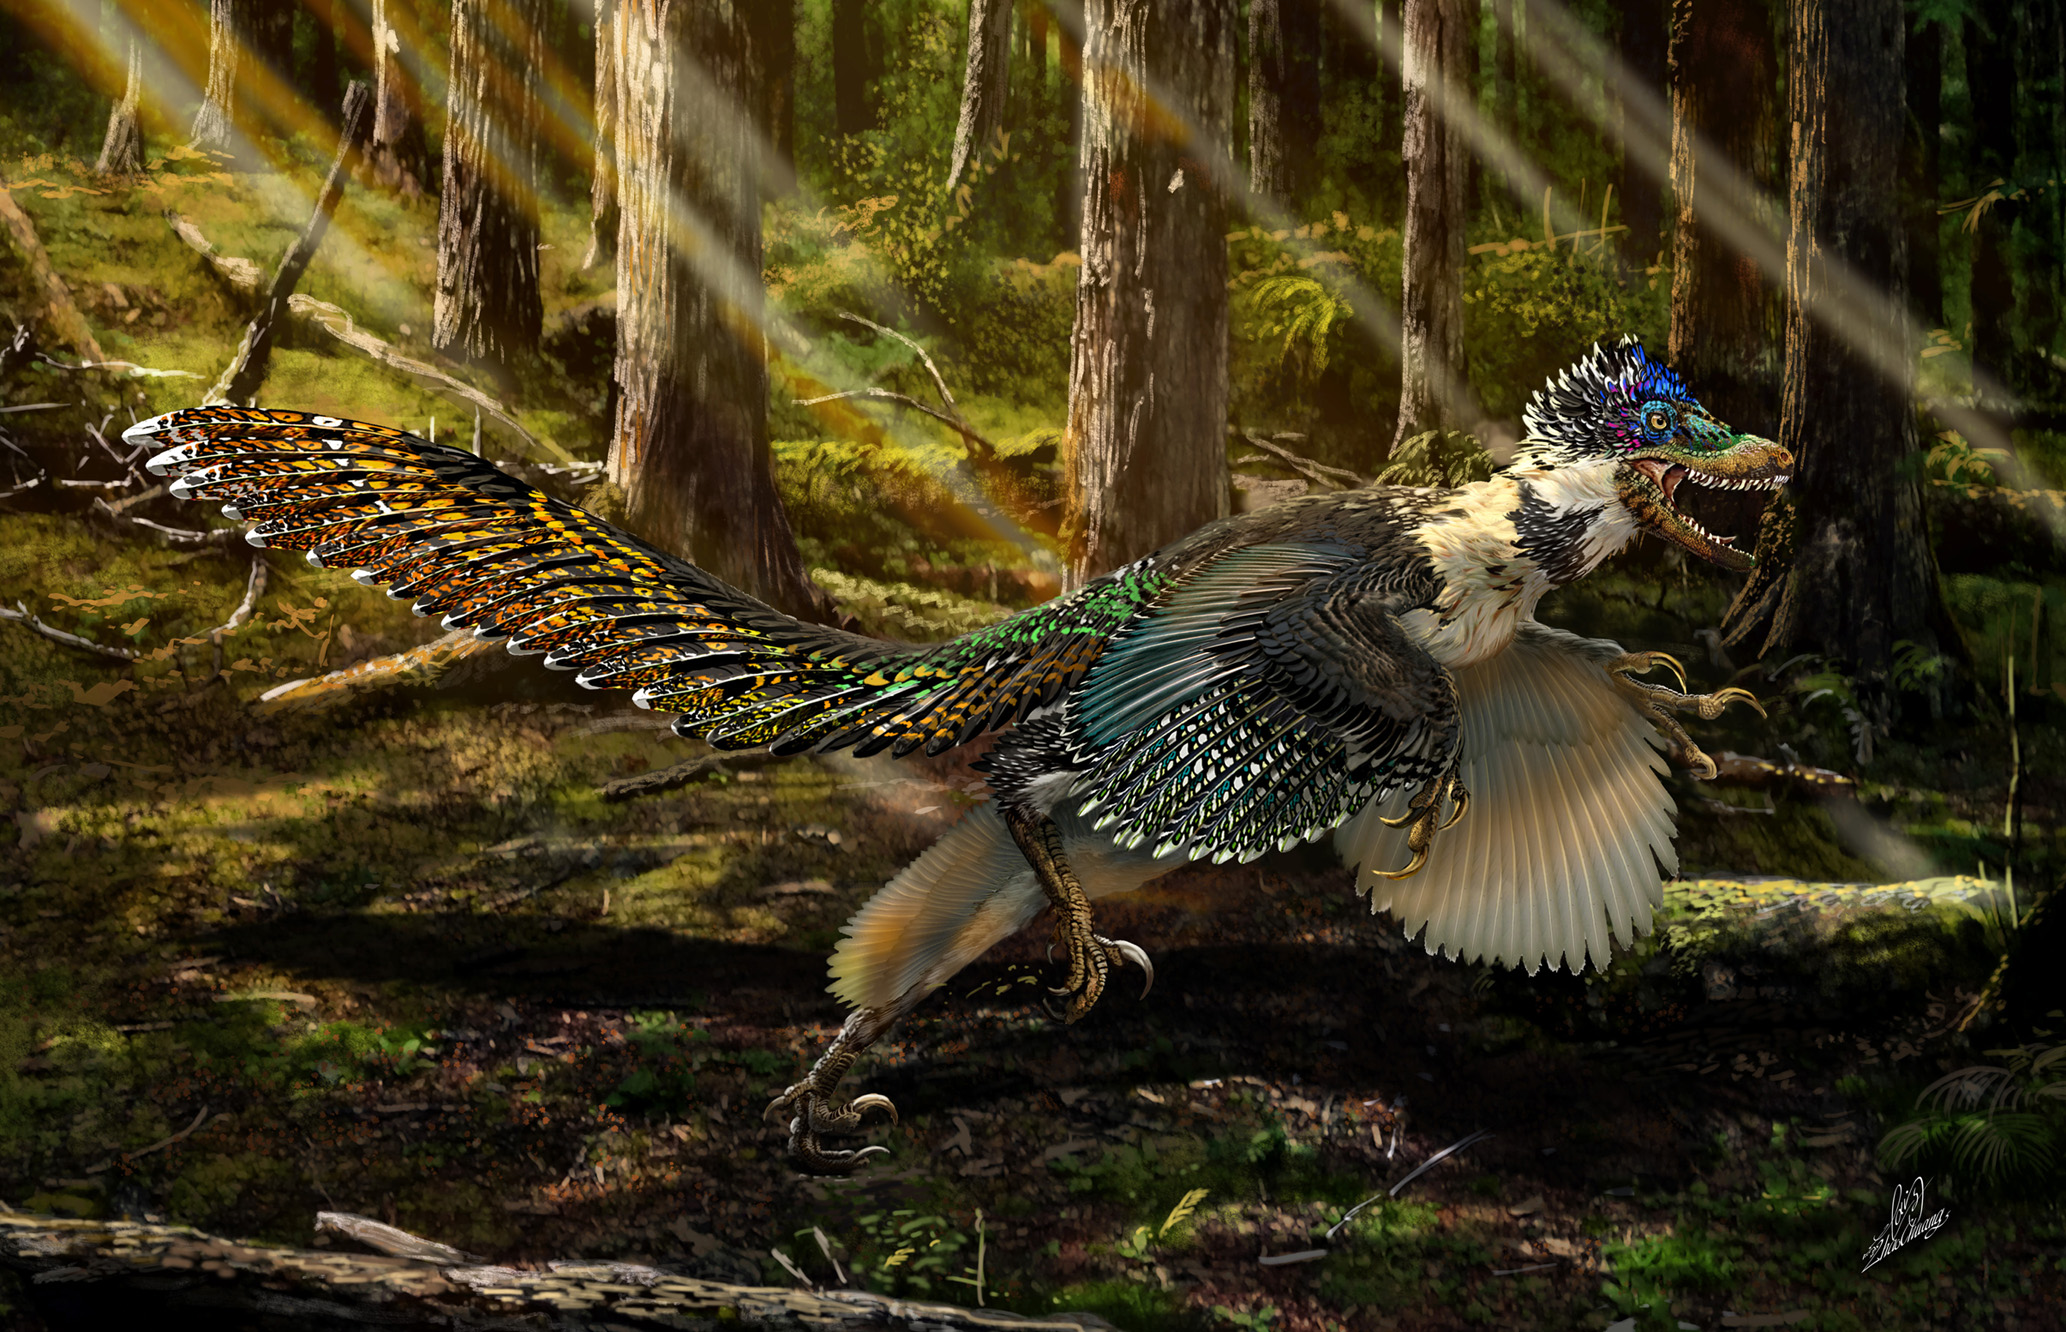 A RESTORATION OF ZHENYUANLONG IN A CRETACEOUS FOREST. Art: Zhao Chuang 